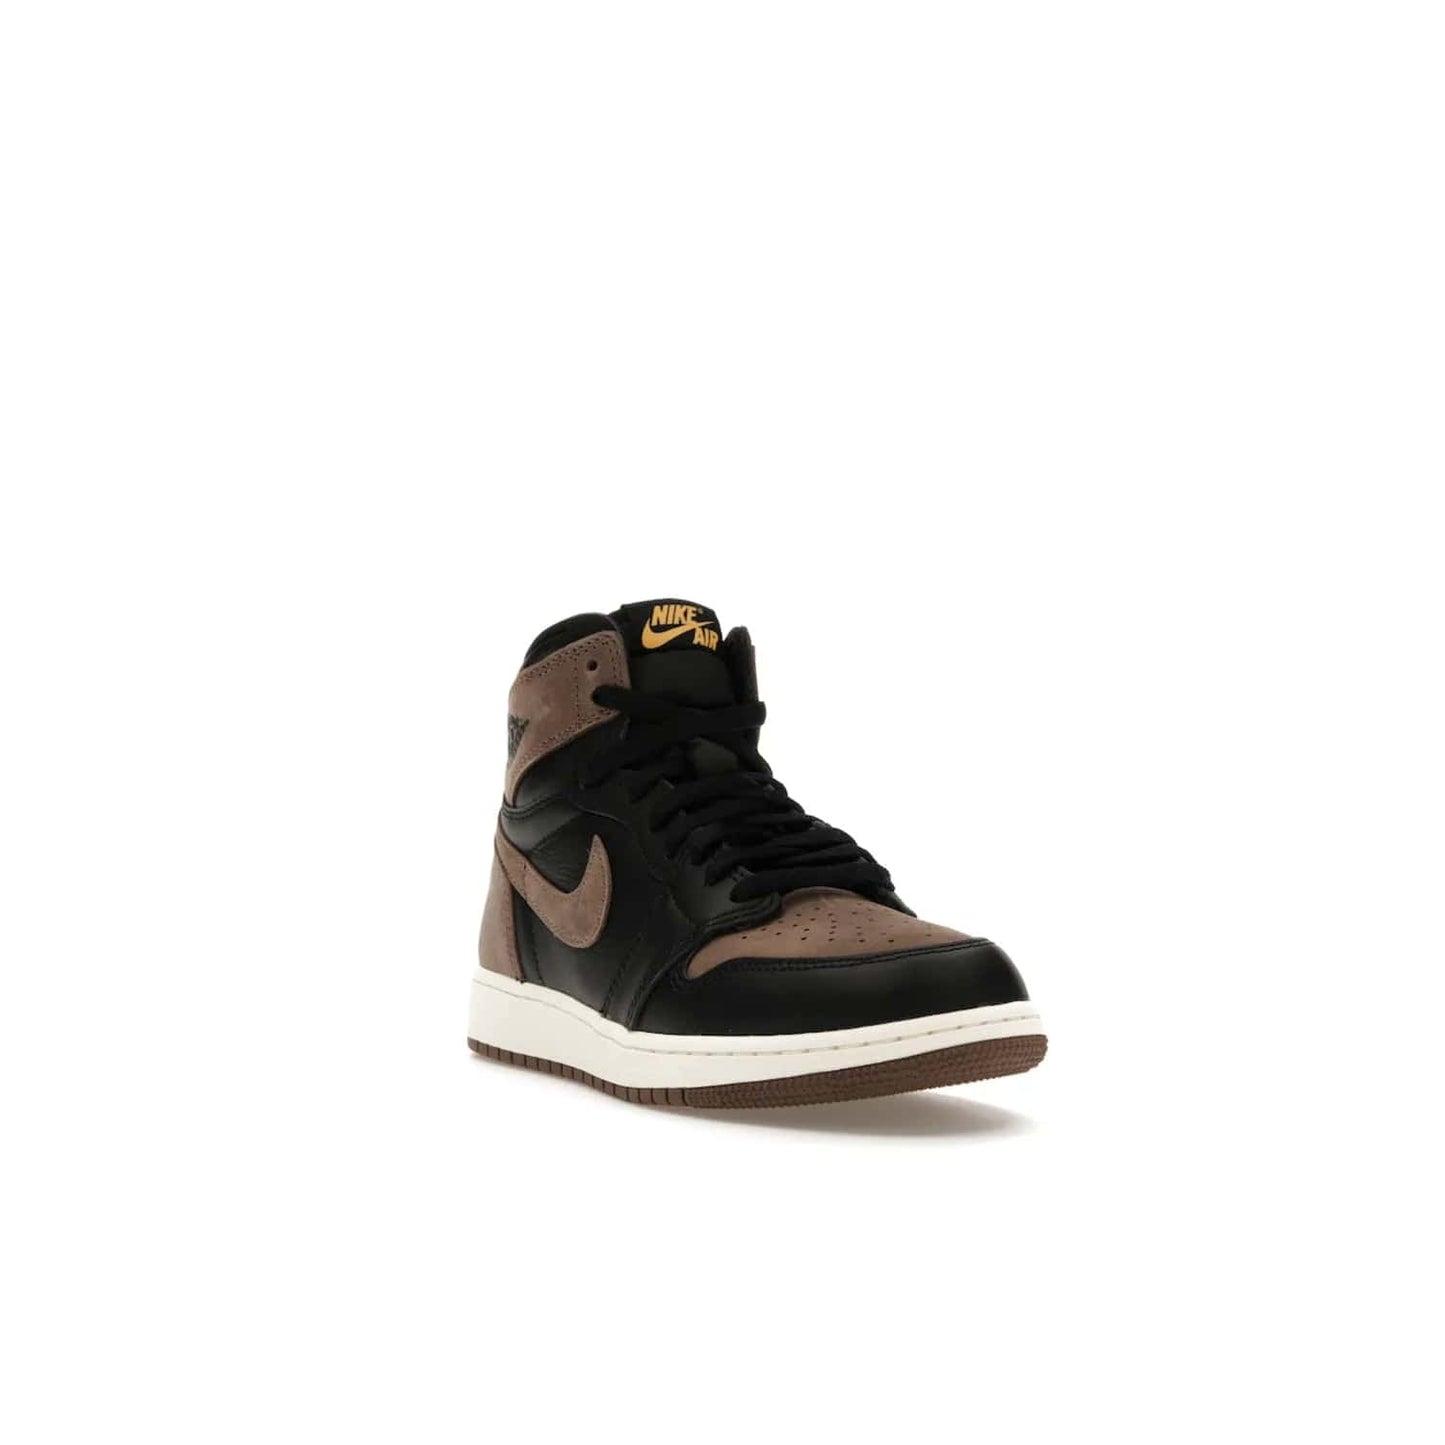 Jordan 1 Retro High OG Palomino (GS) - Image 7 - Only at www.BallersClubKickz.com - Introducing the luxurious Jordan 1 Retro High OG Palomino (GS). Featuring black leather with metallic gold and palomino accents, this sneaker is perfect for any occasion. Grab yours when they release on September 2nd of 2023.